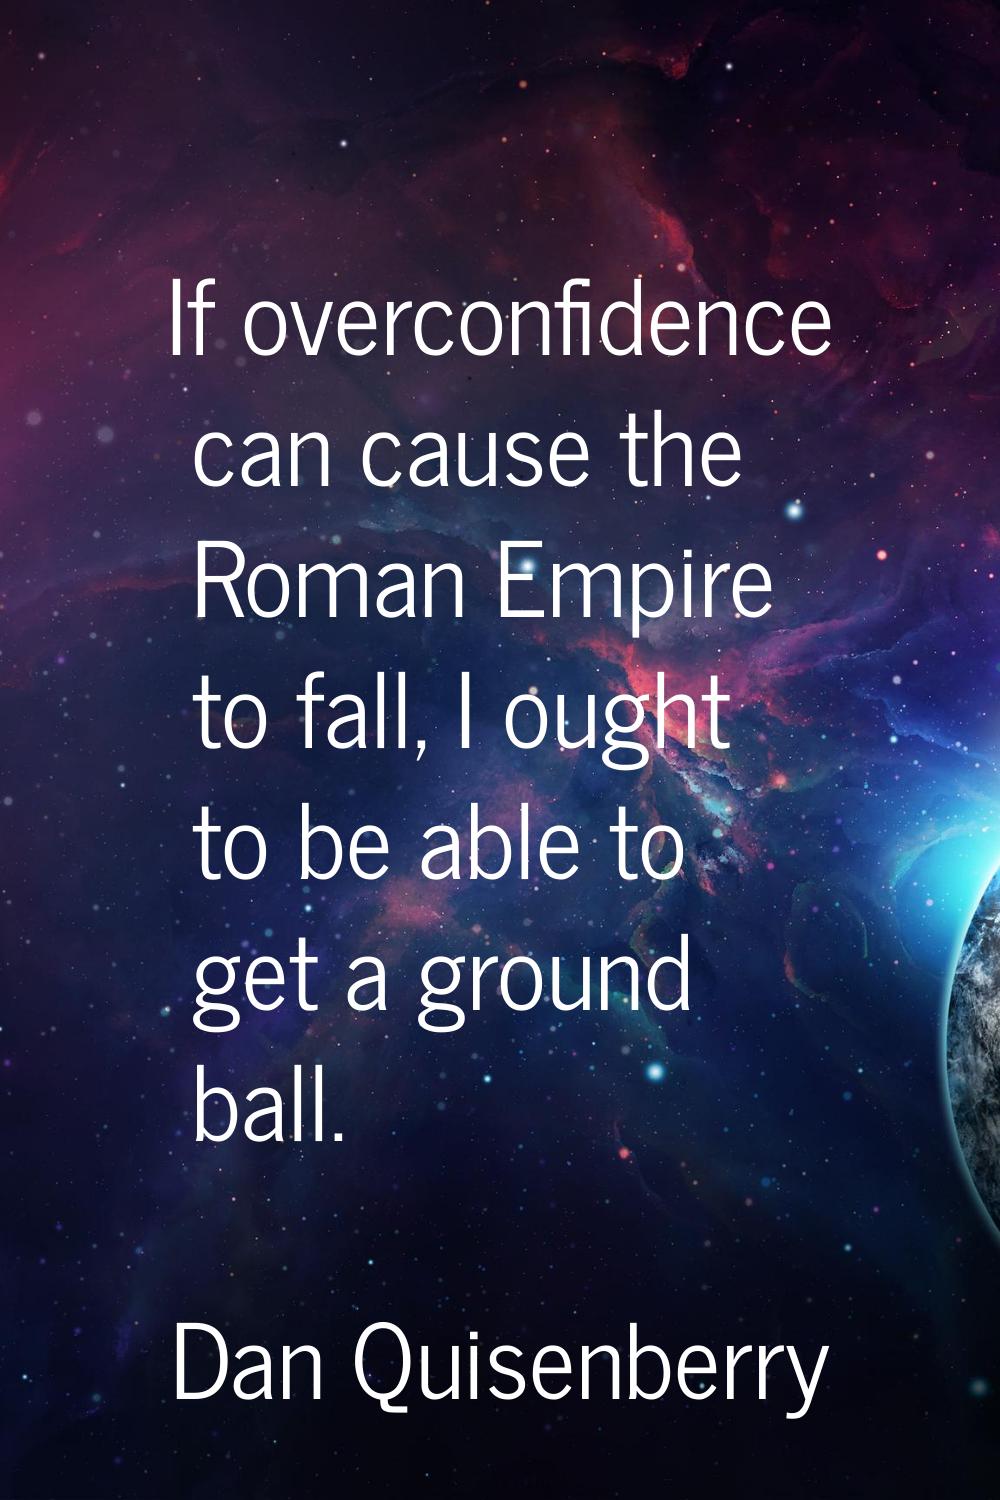 If overconfidence can cause the Roman Empire to fall, I ought to be able to get a ground ball.